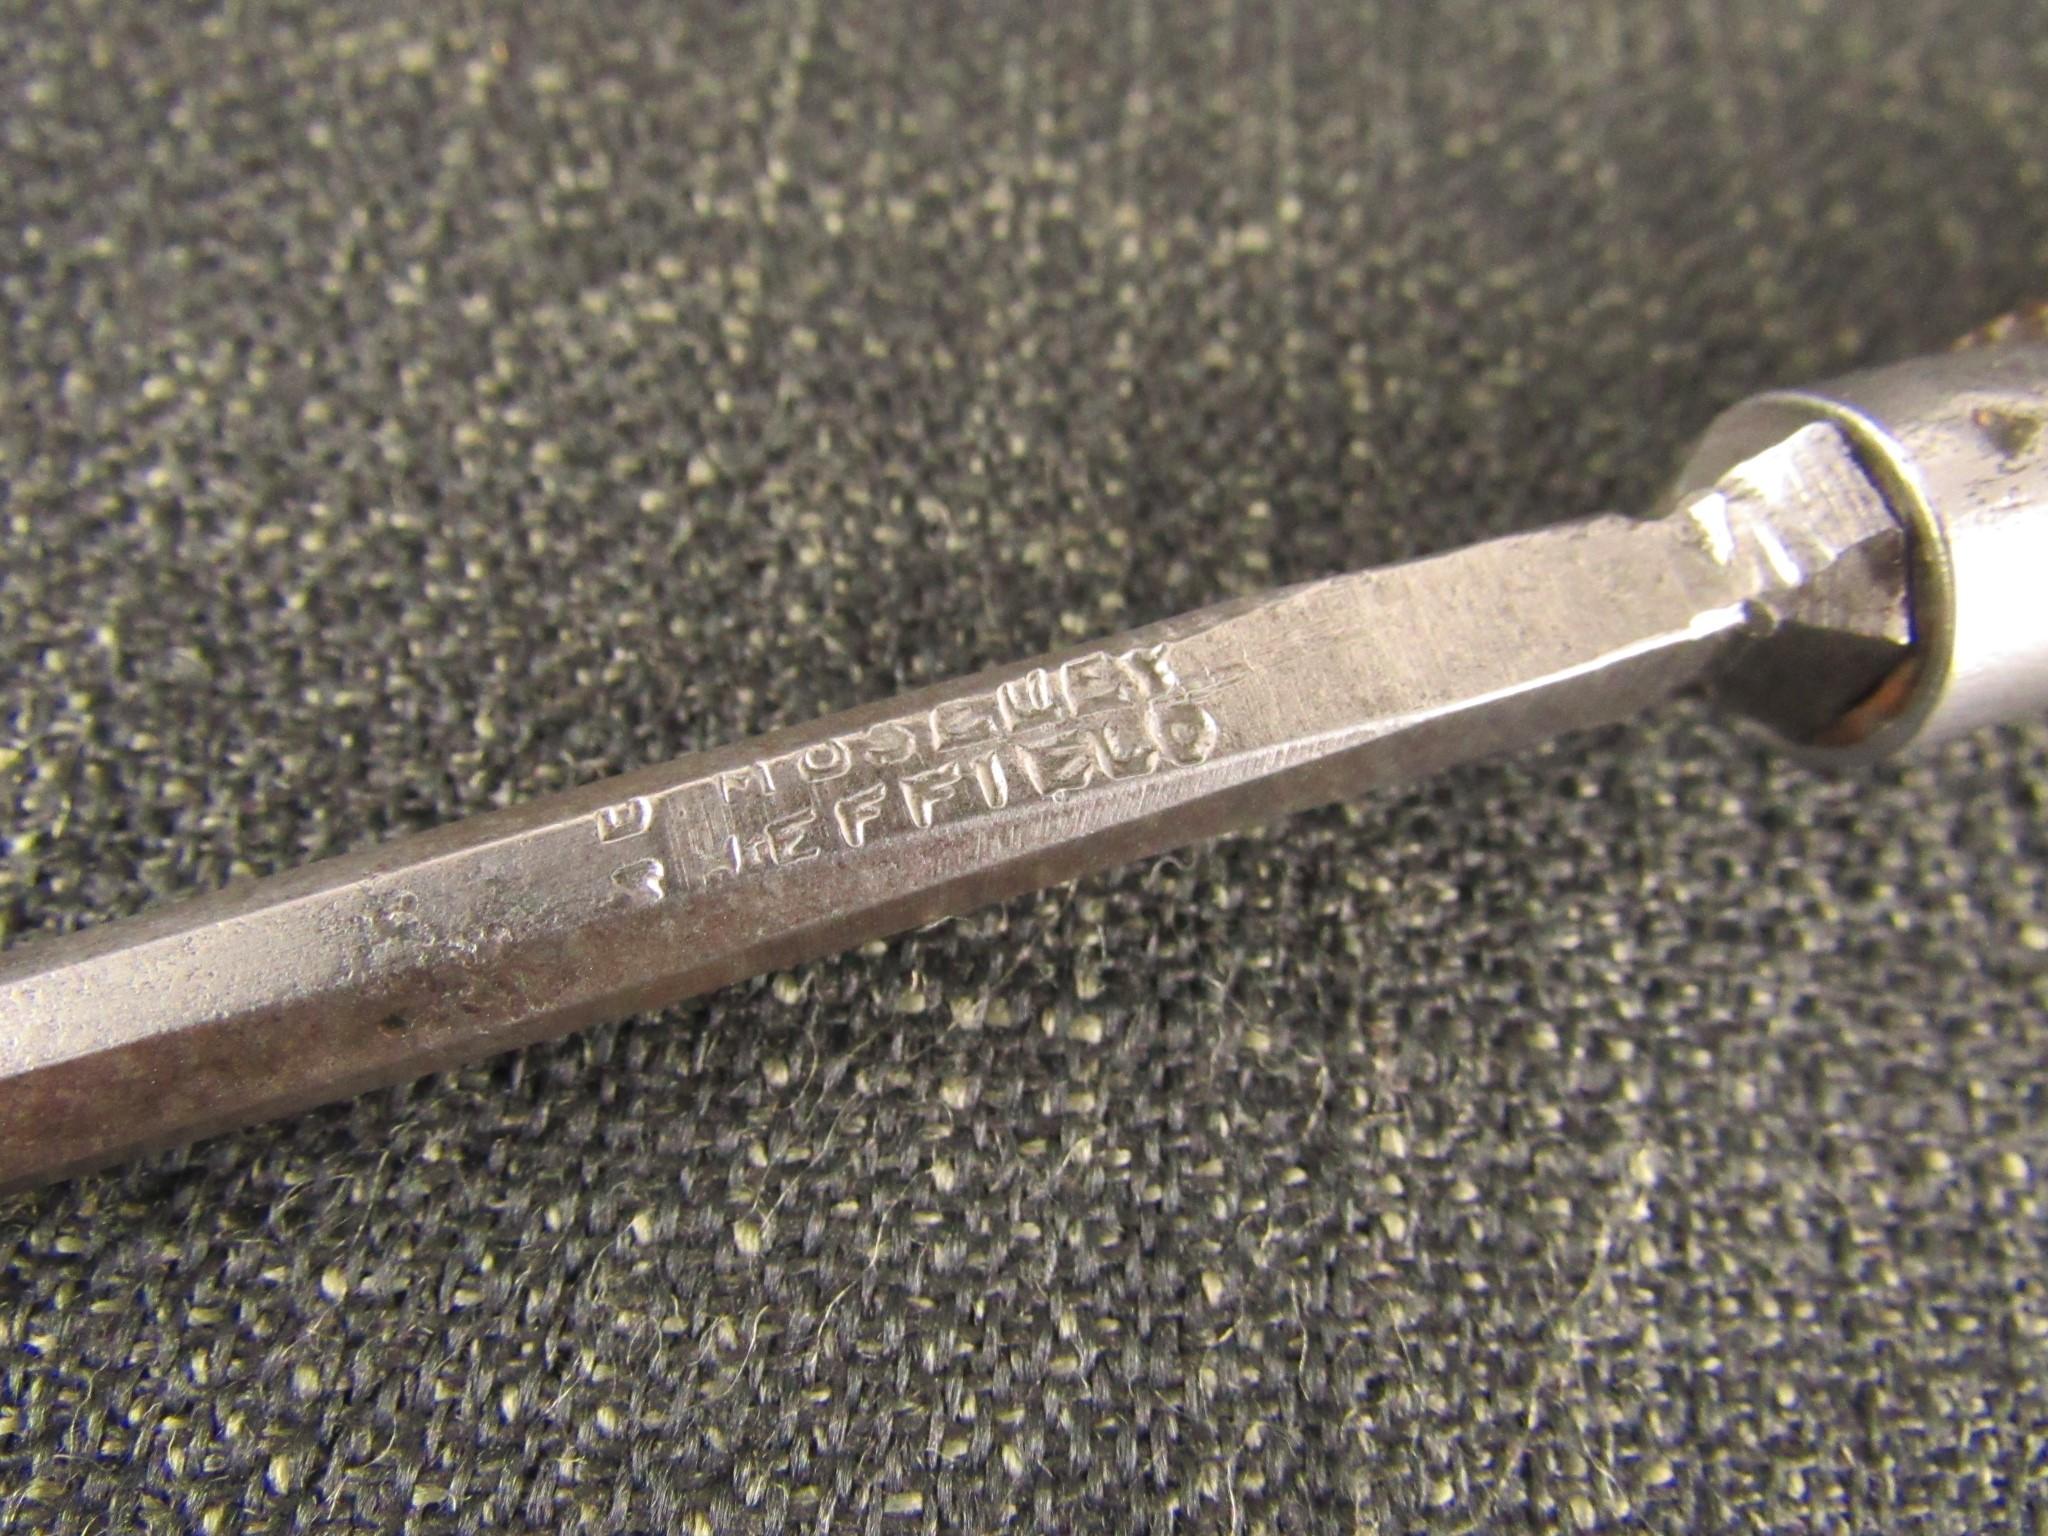 1/4 inch Bevel Edge Chisel by MOSELEY of Sheffield